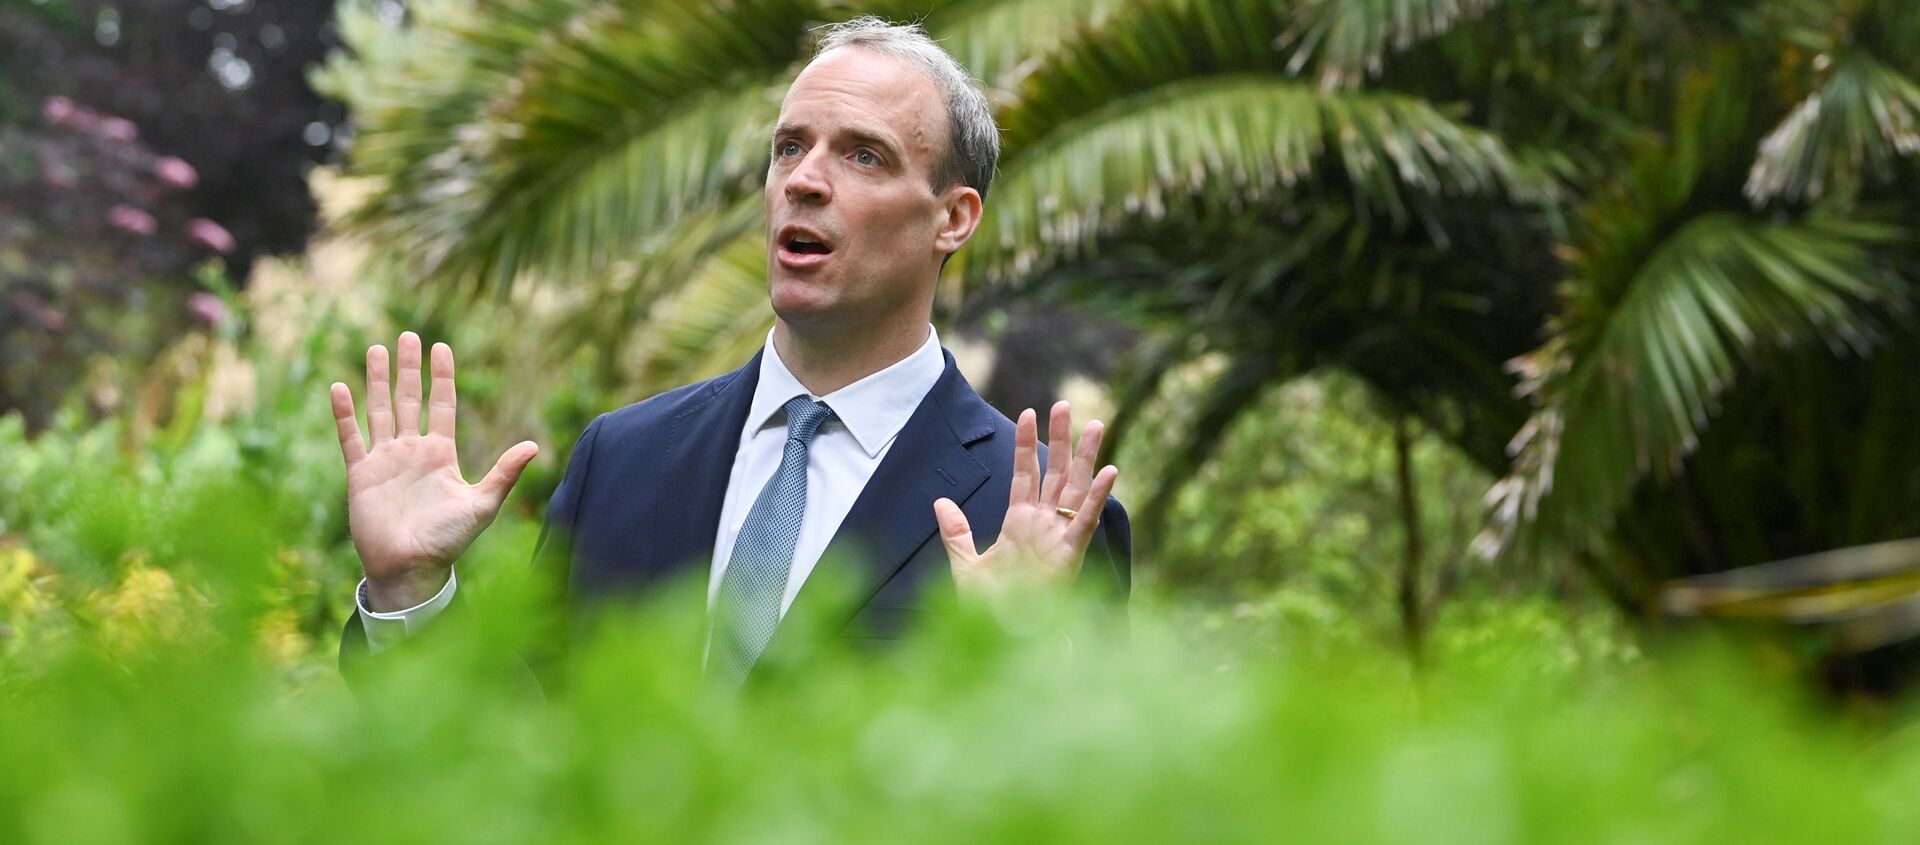 Britain's Foreign Secretary Dominic Raab gestures during an interview with Reuters on the sidelines of G7 summit in Carbis Bay, Cornwall, Britain, June 11, 2021. - Sputnik International, 1920